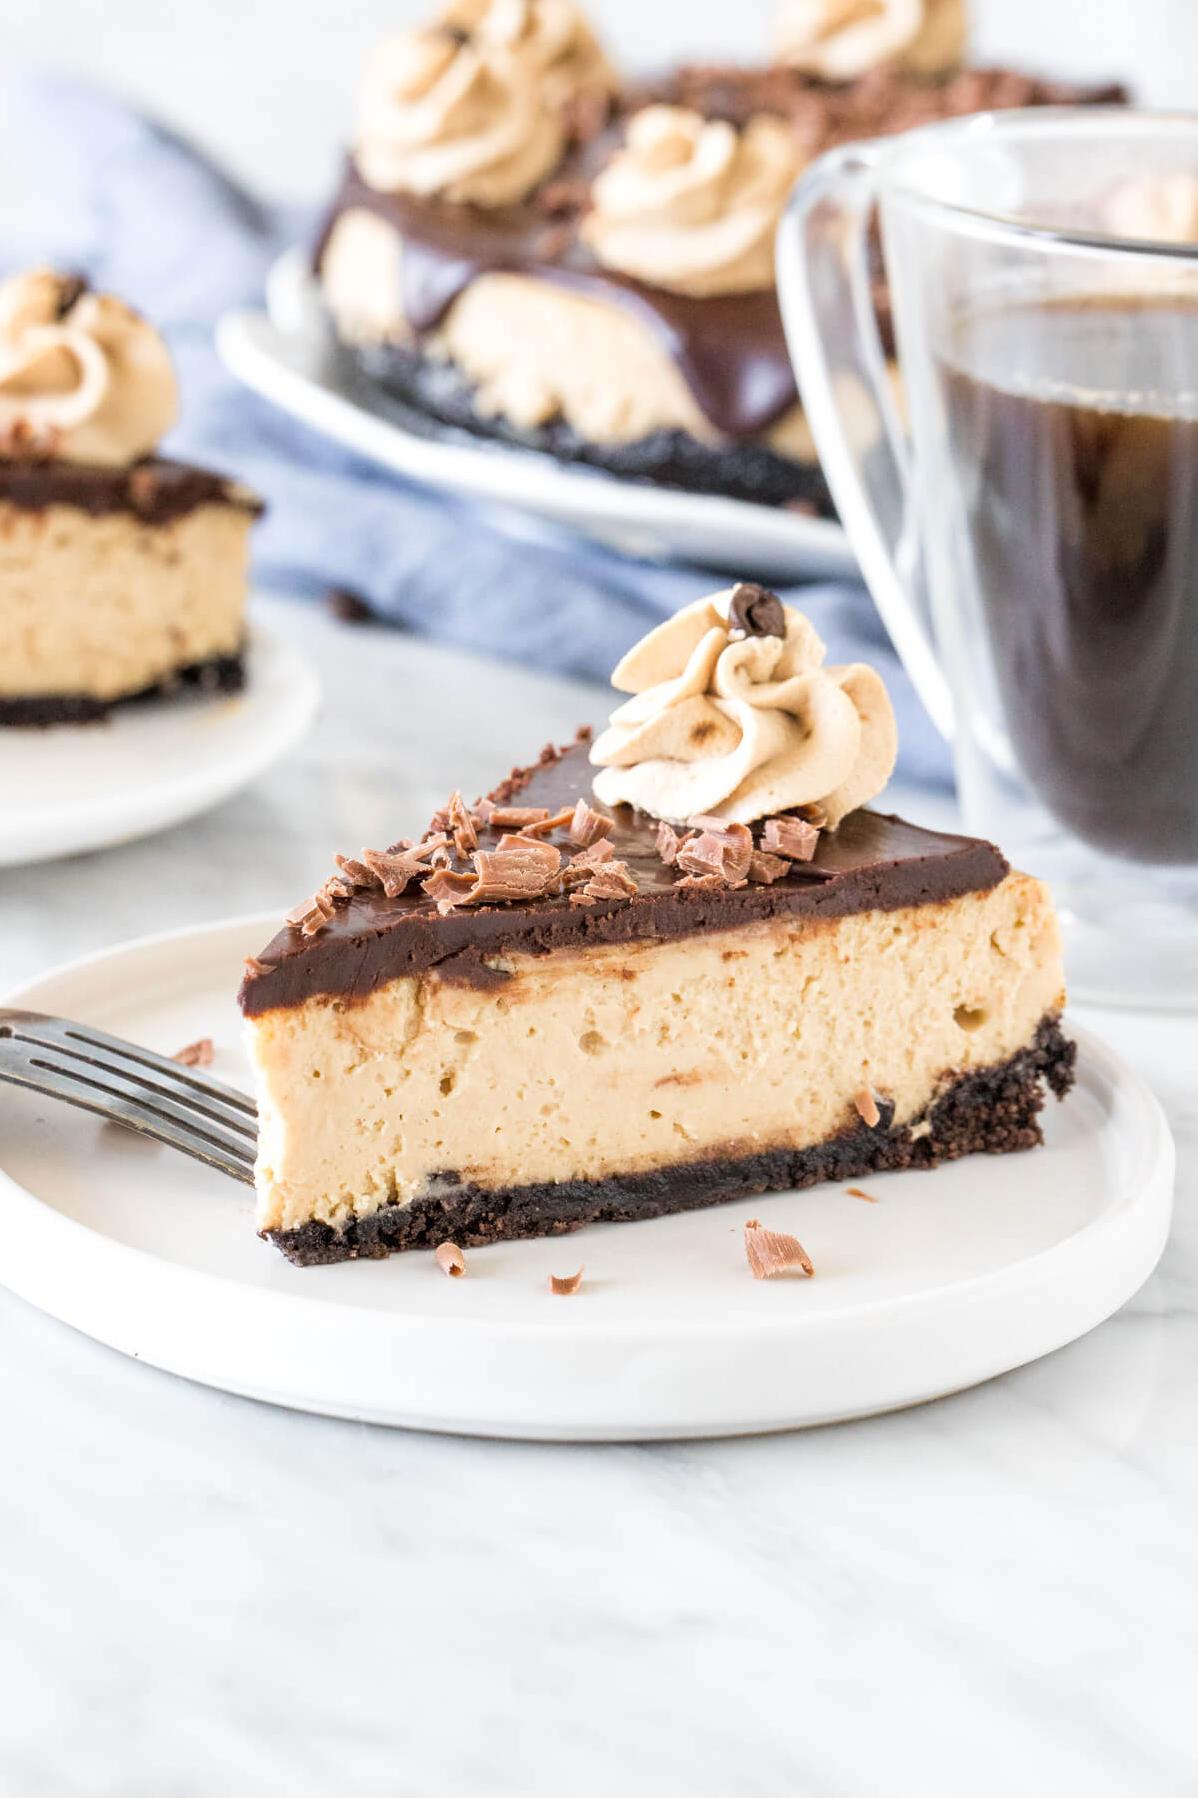  A decadent slice of heaven on a plate: chocolate cheesecake with coffee cream.